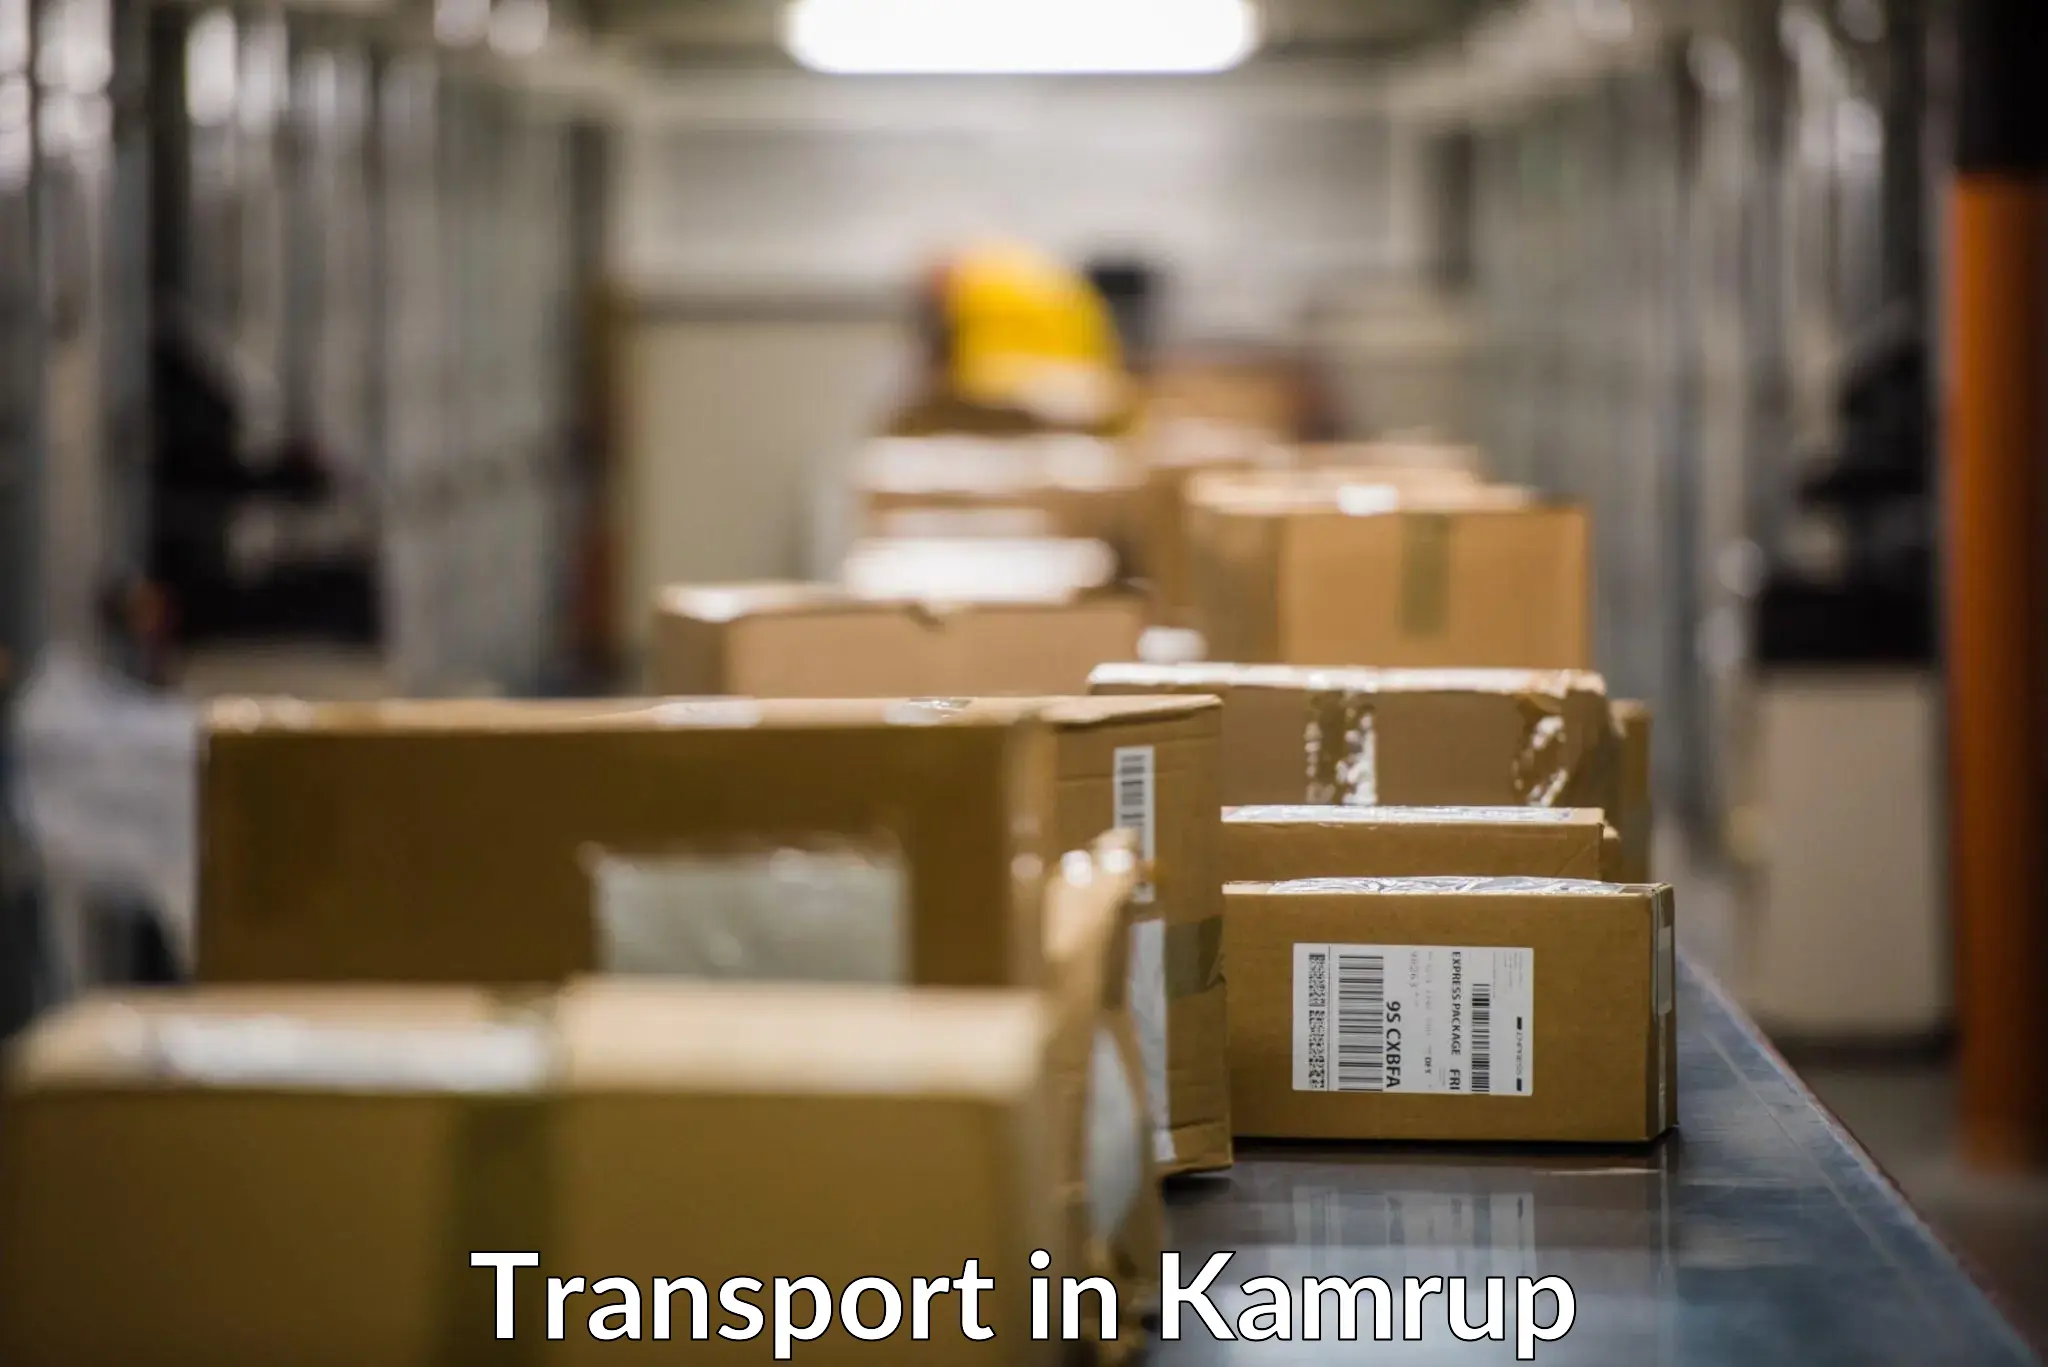 Vehicle transport services in Kamrup